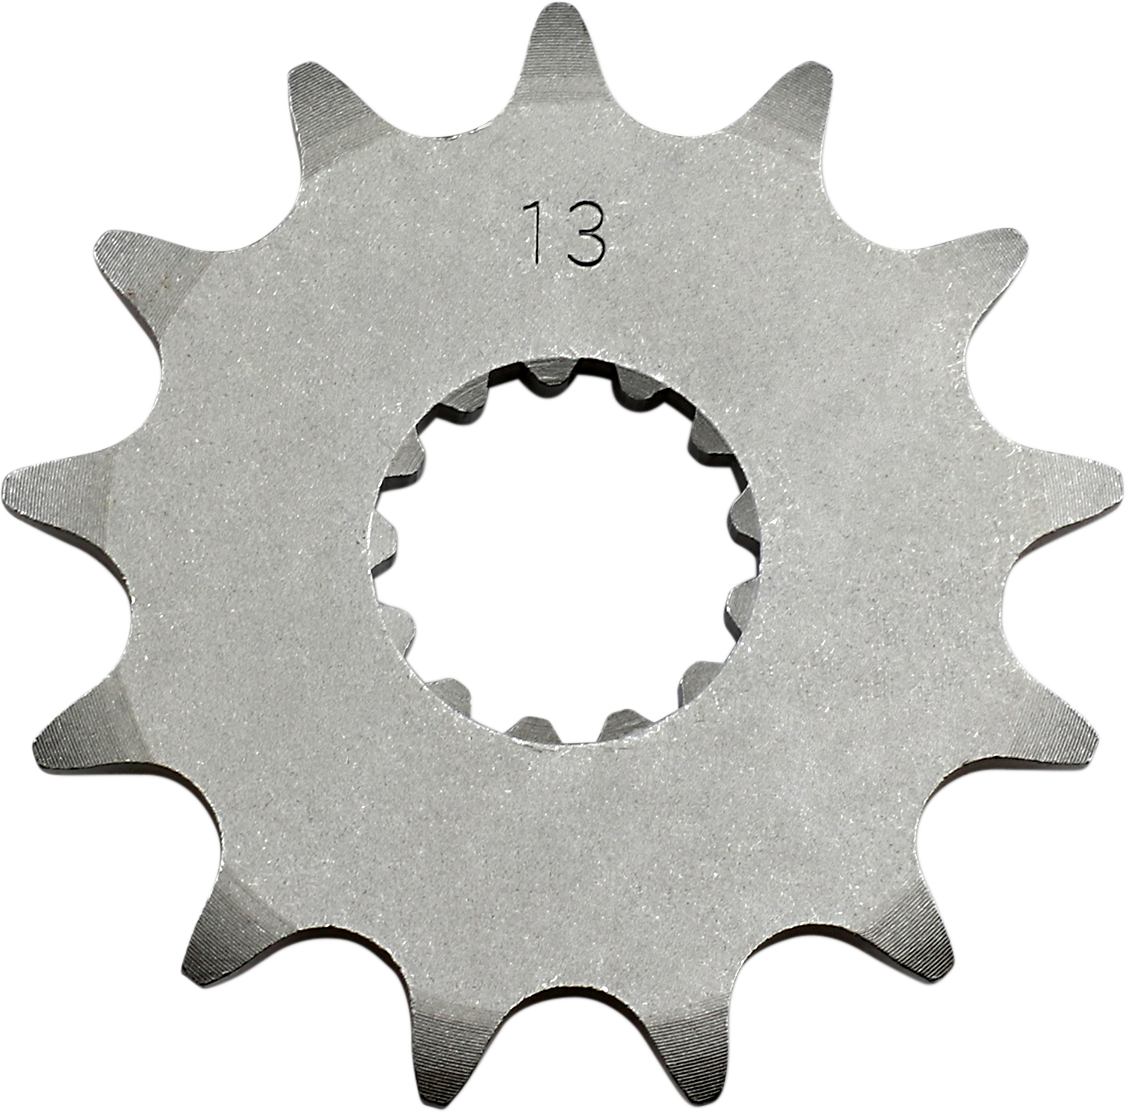 Parts Unlimited Countershaft Sprocket - 13-Tooth 214-17461-30